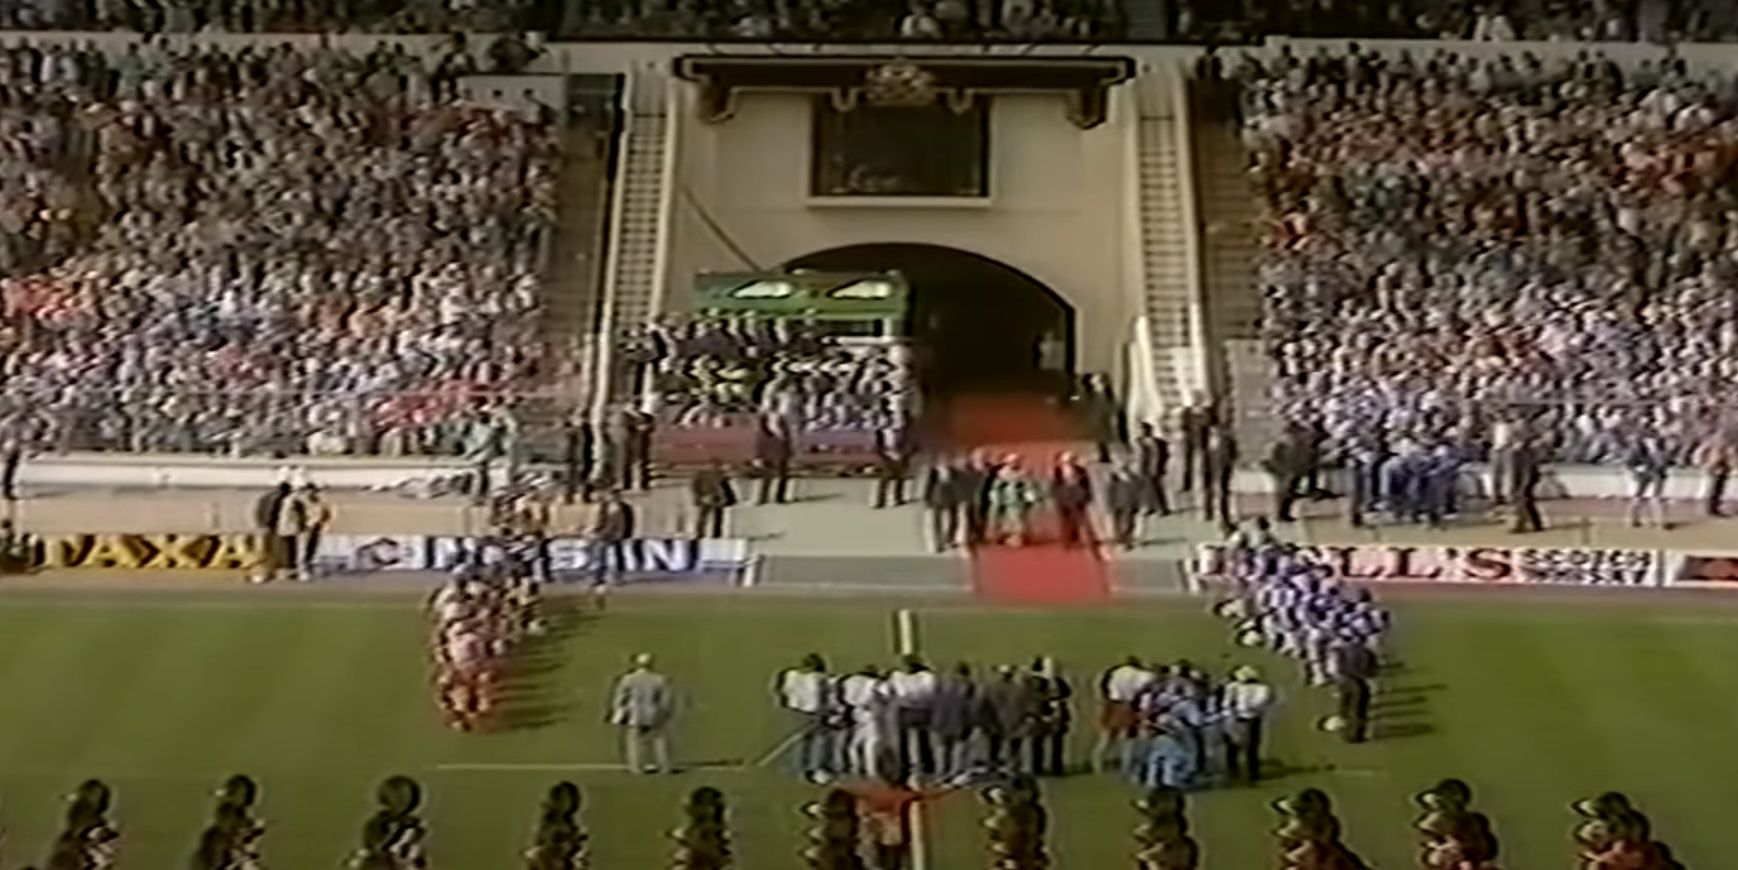 (Video) Liverpool fans boo national anthem before 1986 FA Cup final at Wembley